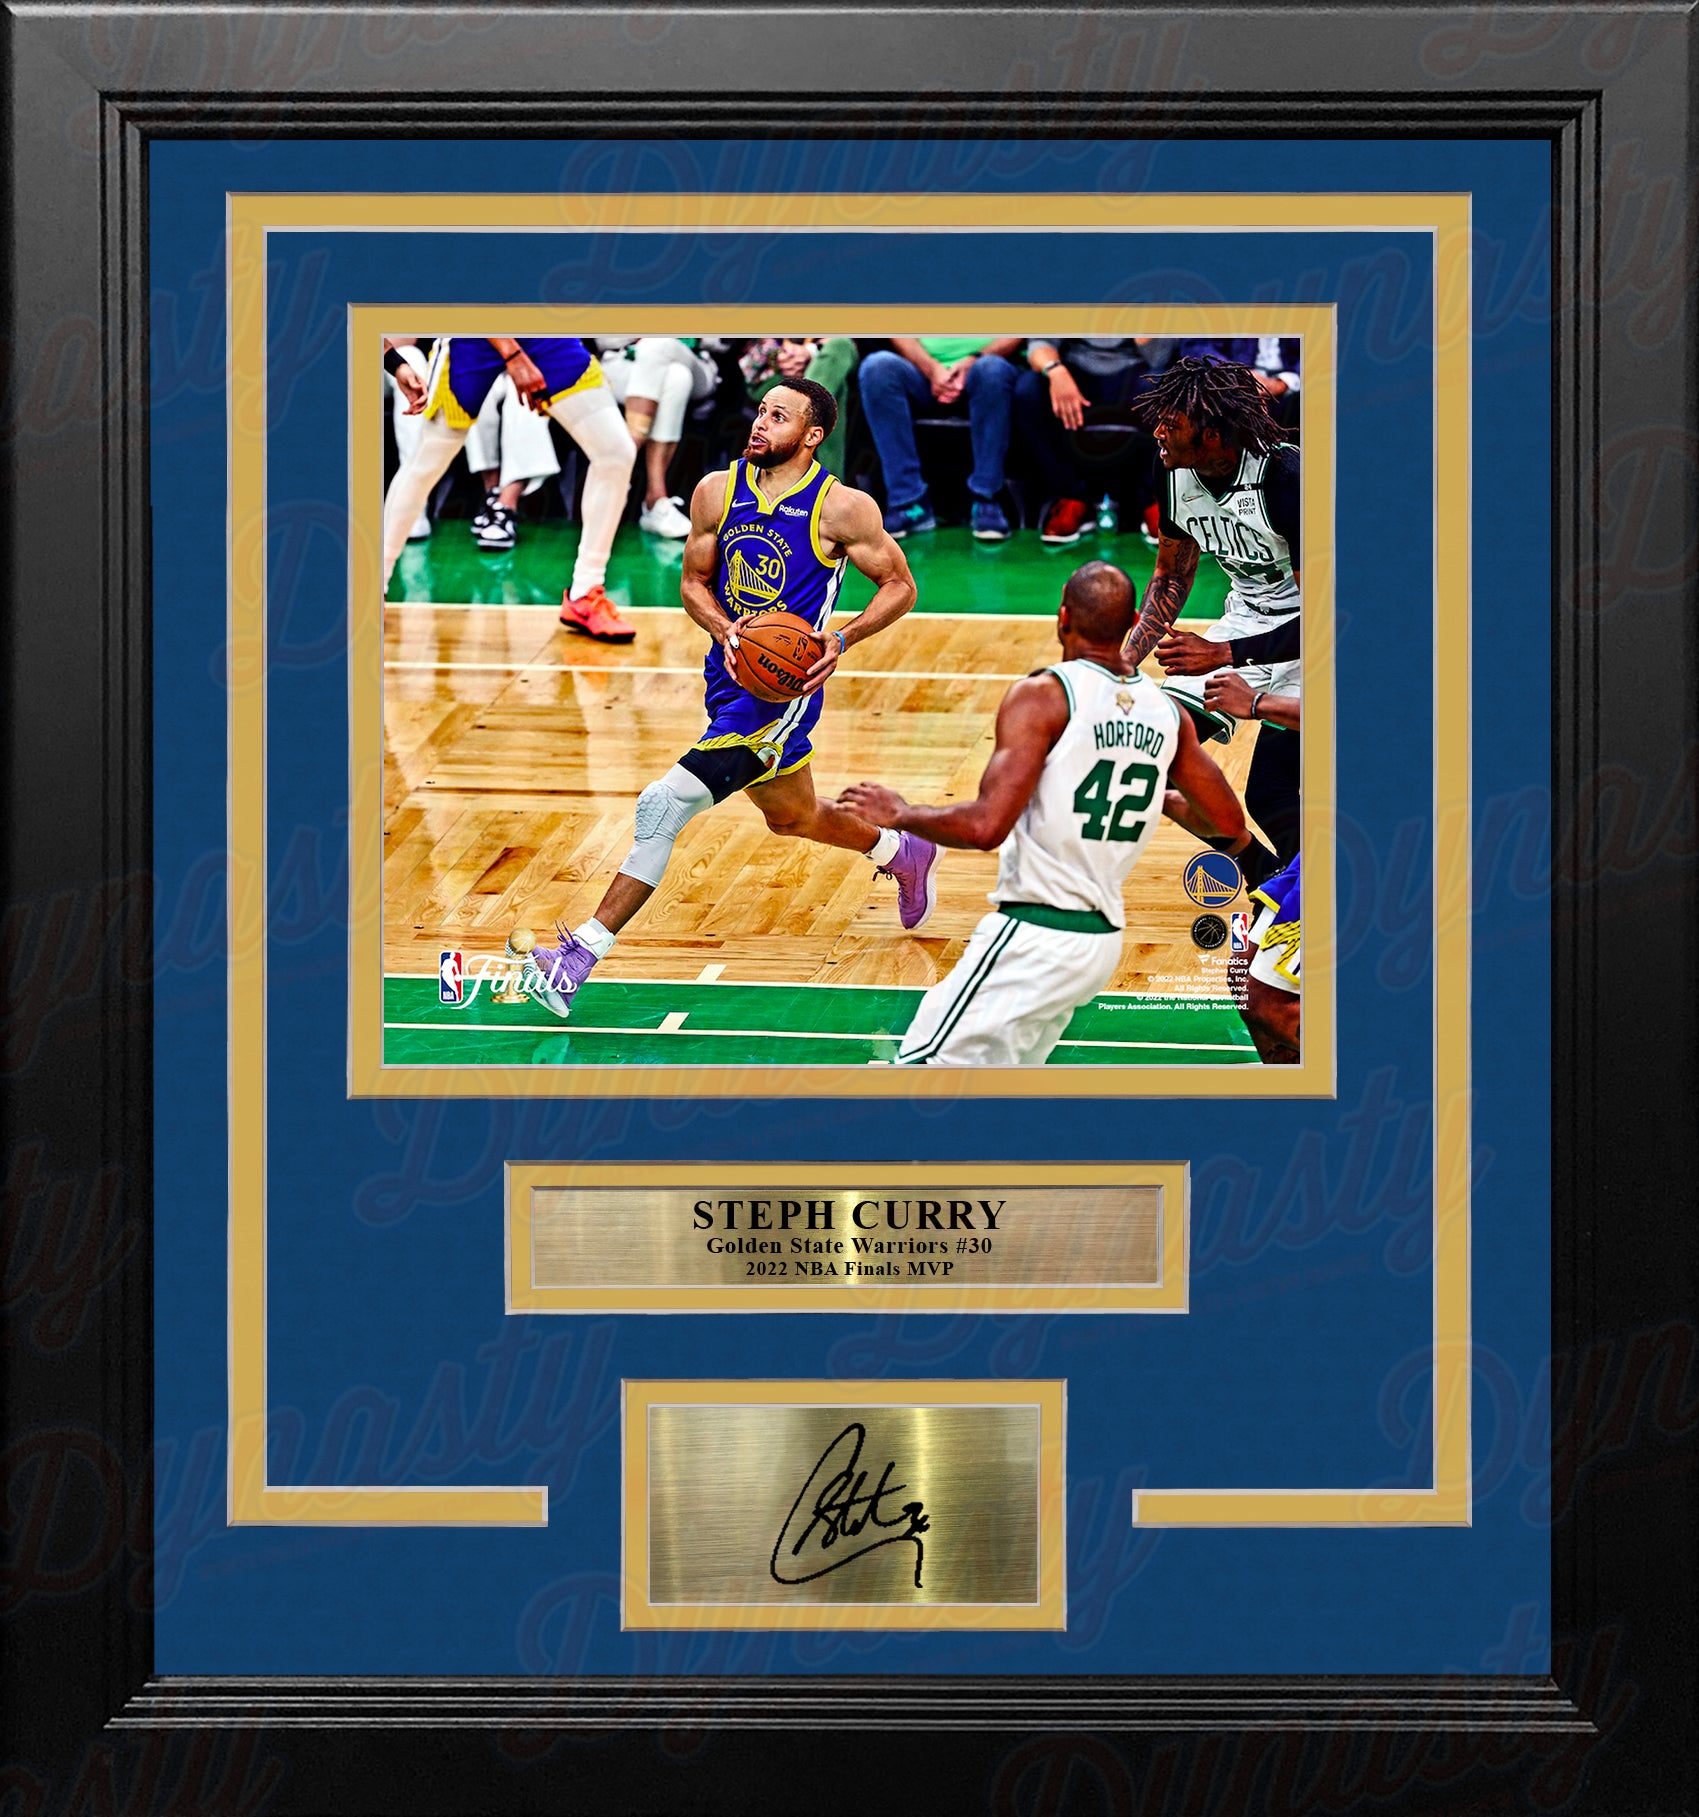 Steph Curry 2022 NBA Finals Action Golden State Warriors 8x10 Framed Photo with Engraved Autograph - Dynasty Sports & Framing 